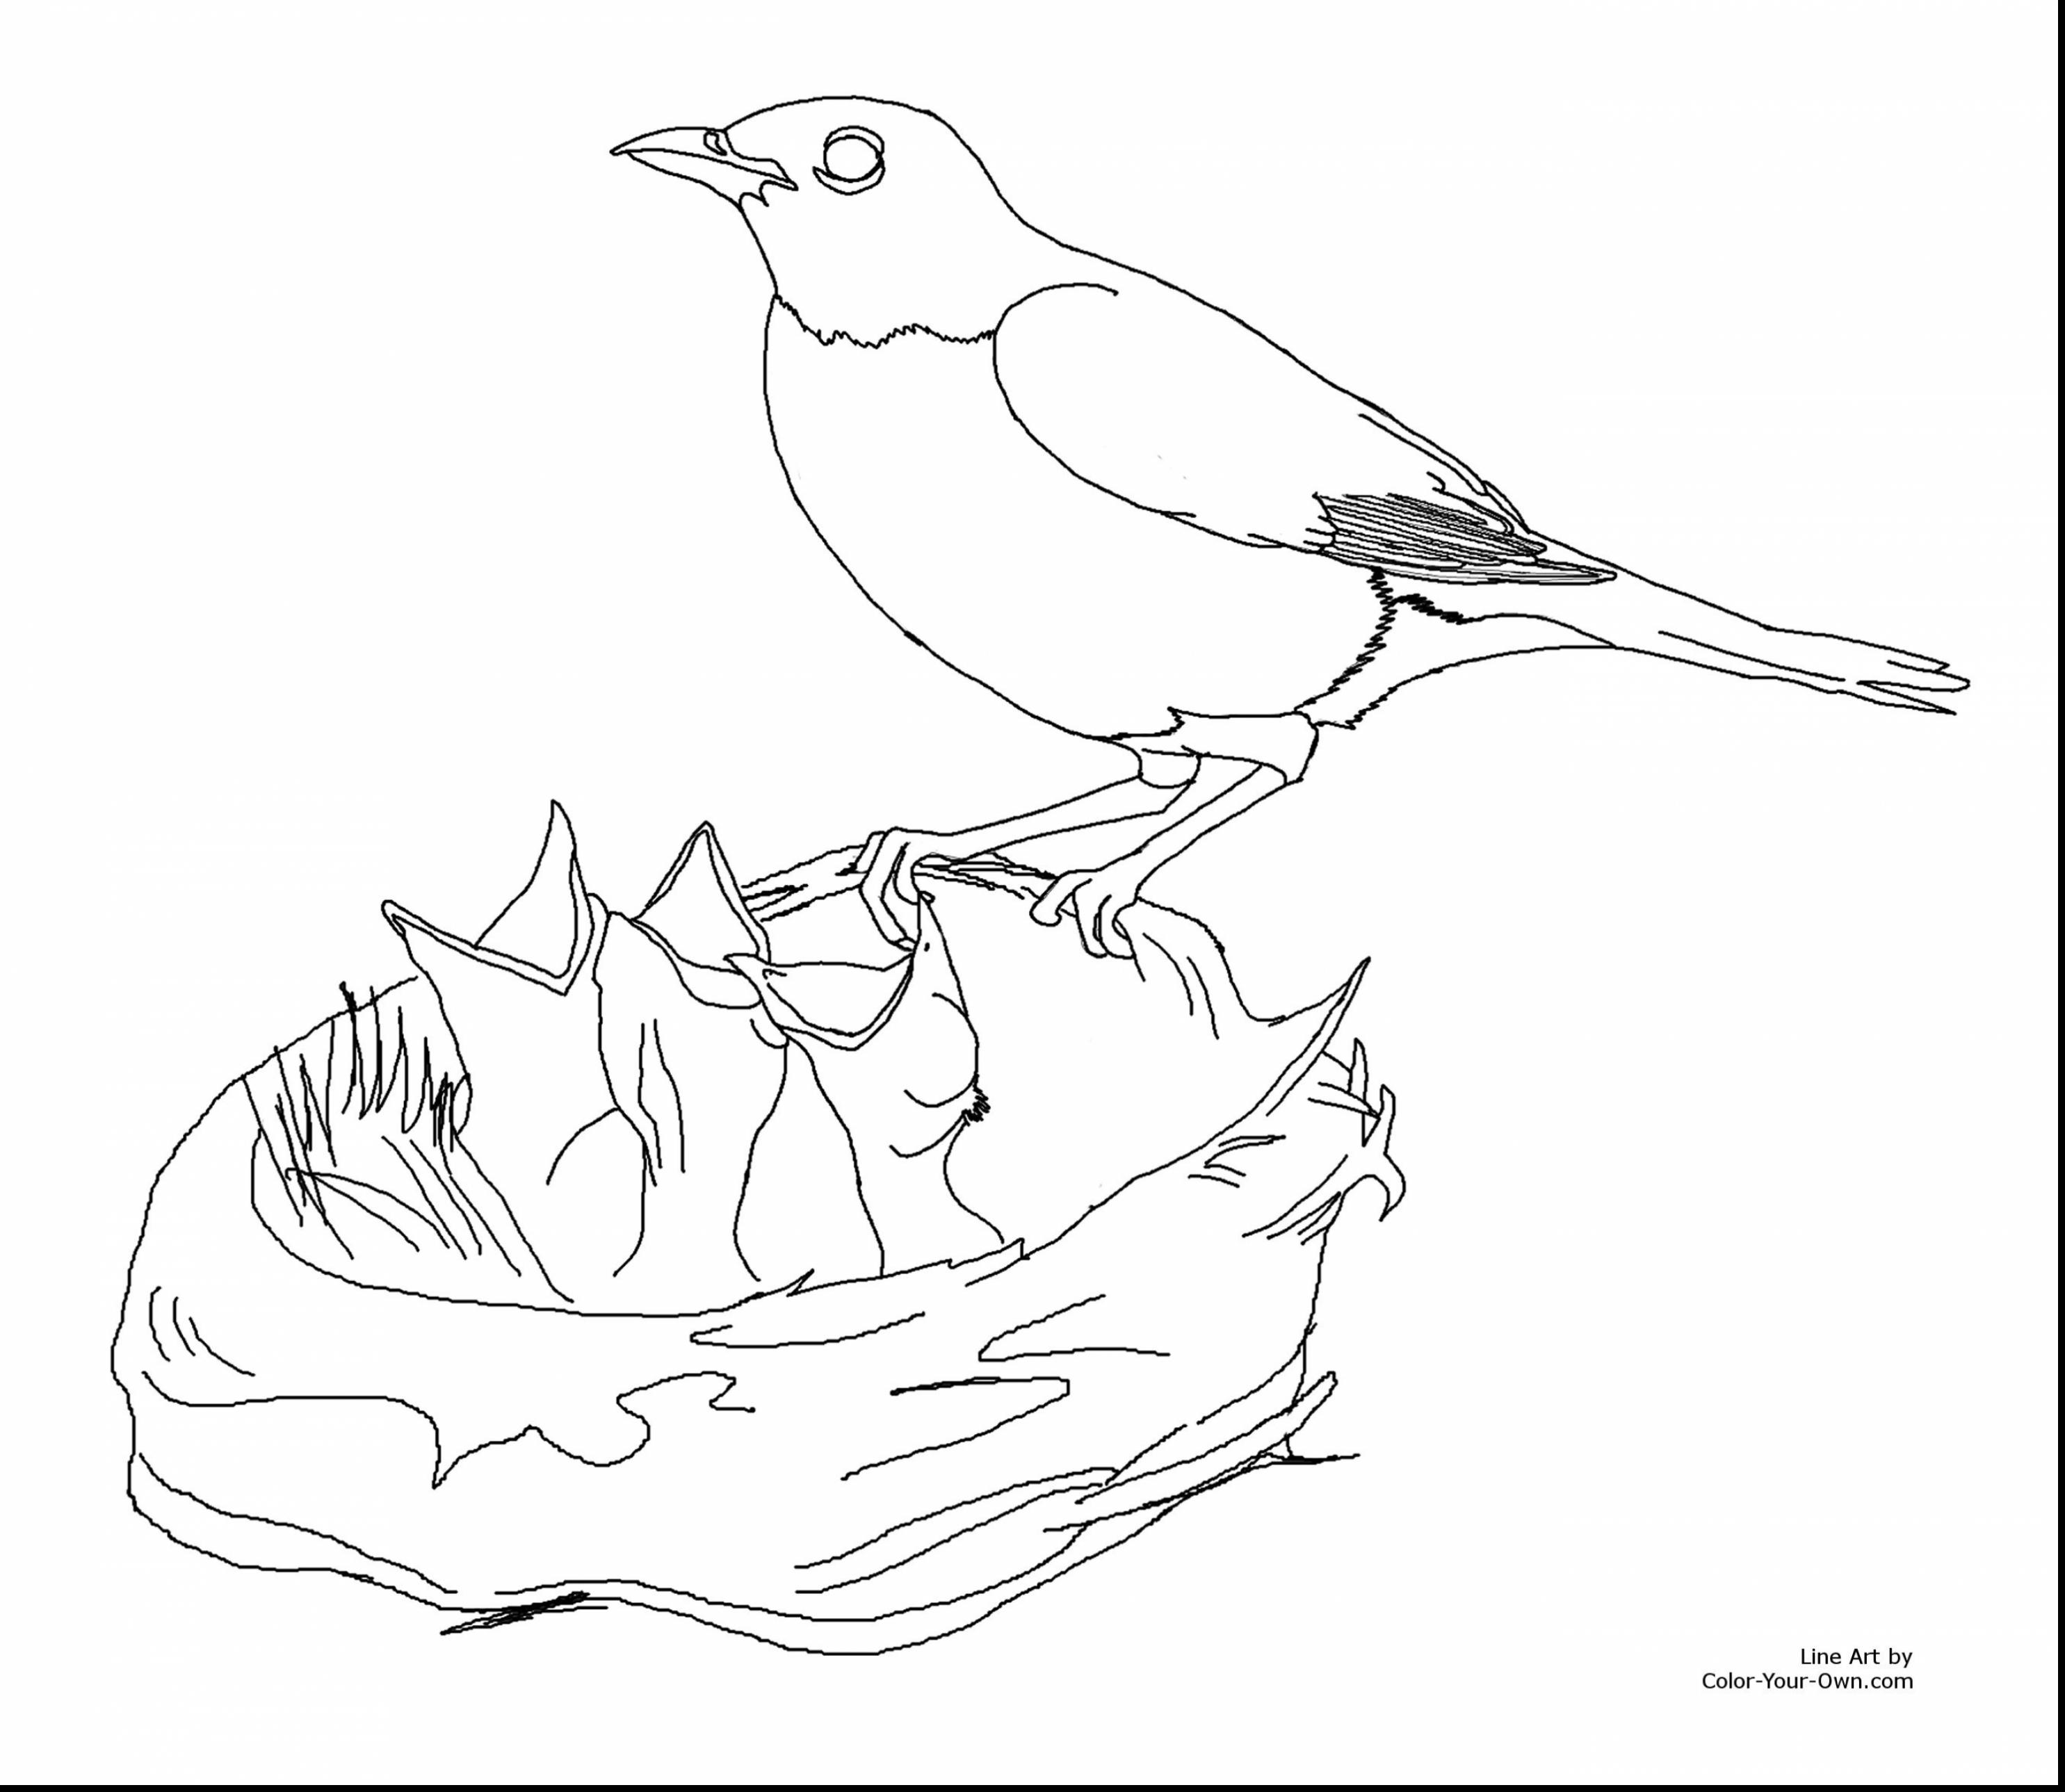 Canary Coloring Page at GetColorings.com | Free printable colorings